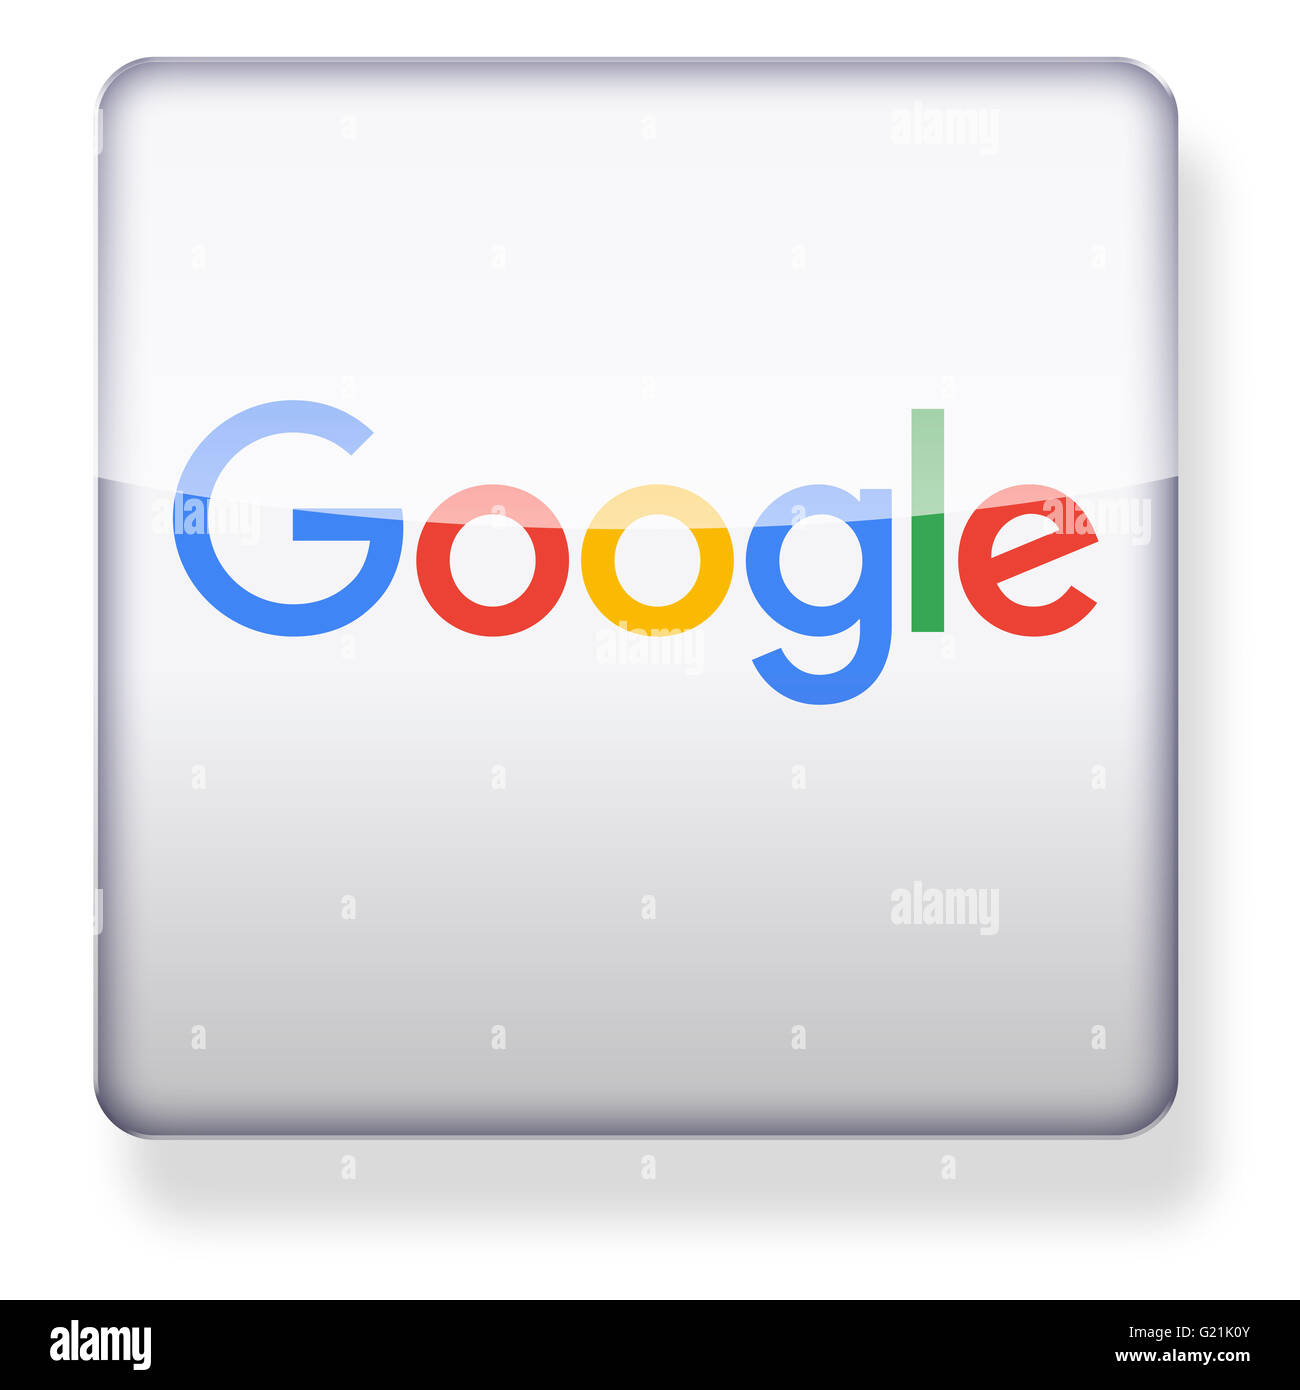 New Google logo as an app icon. Clipping path included. Stock Photo